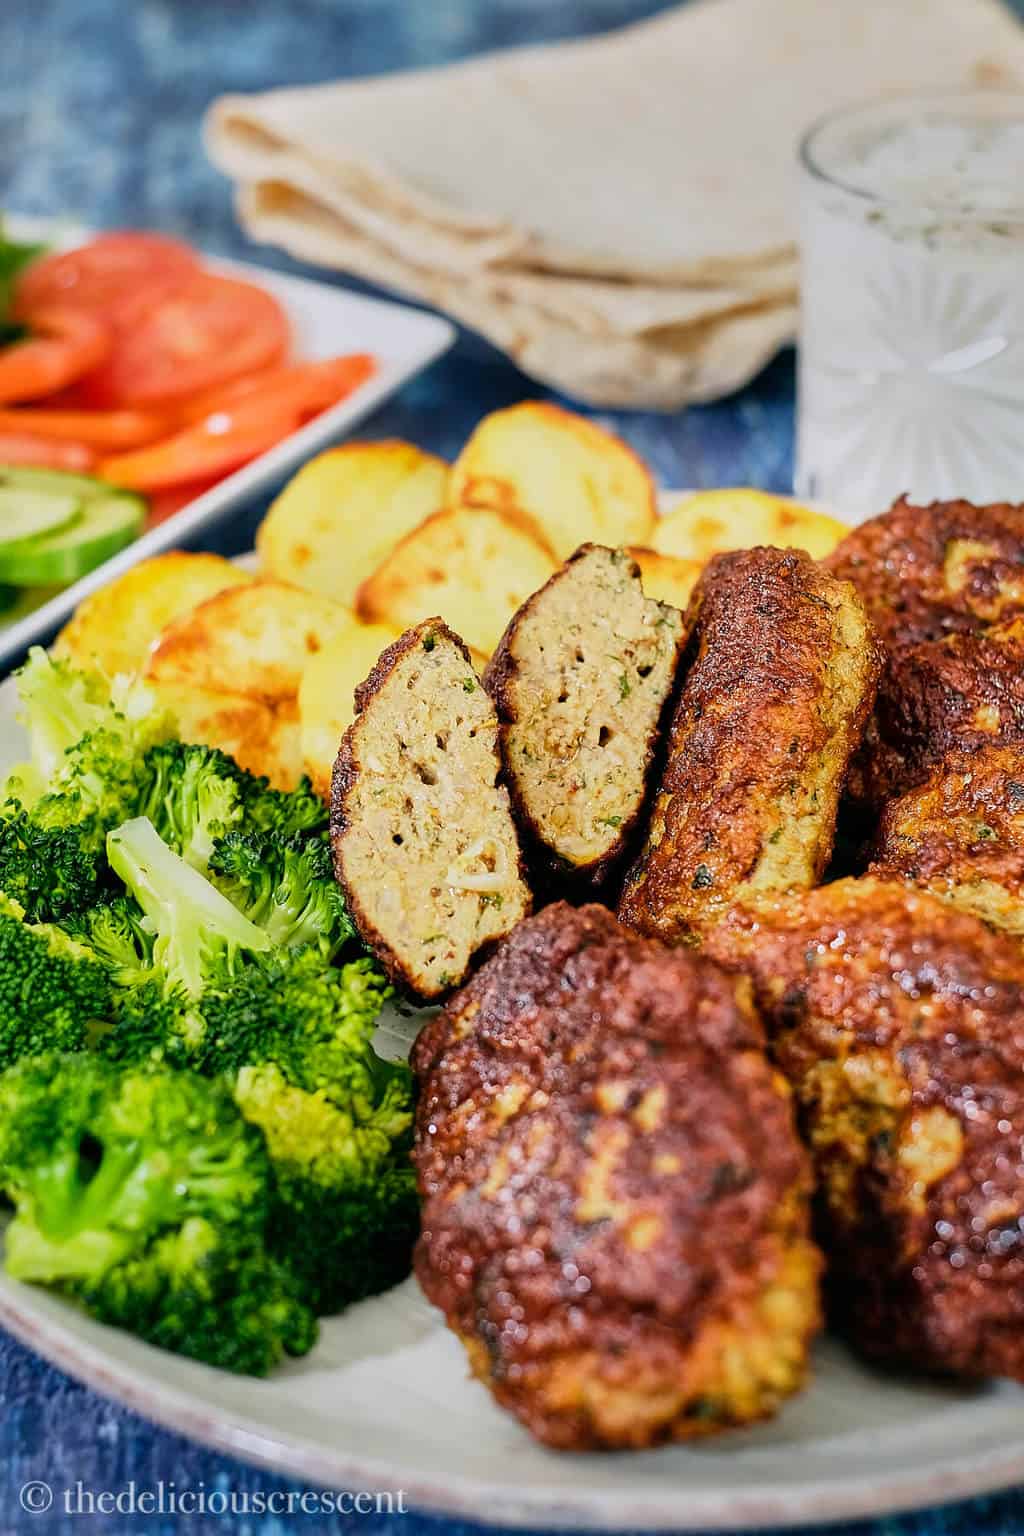 Close up view of meat patties with sides.